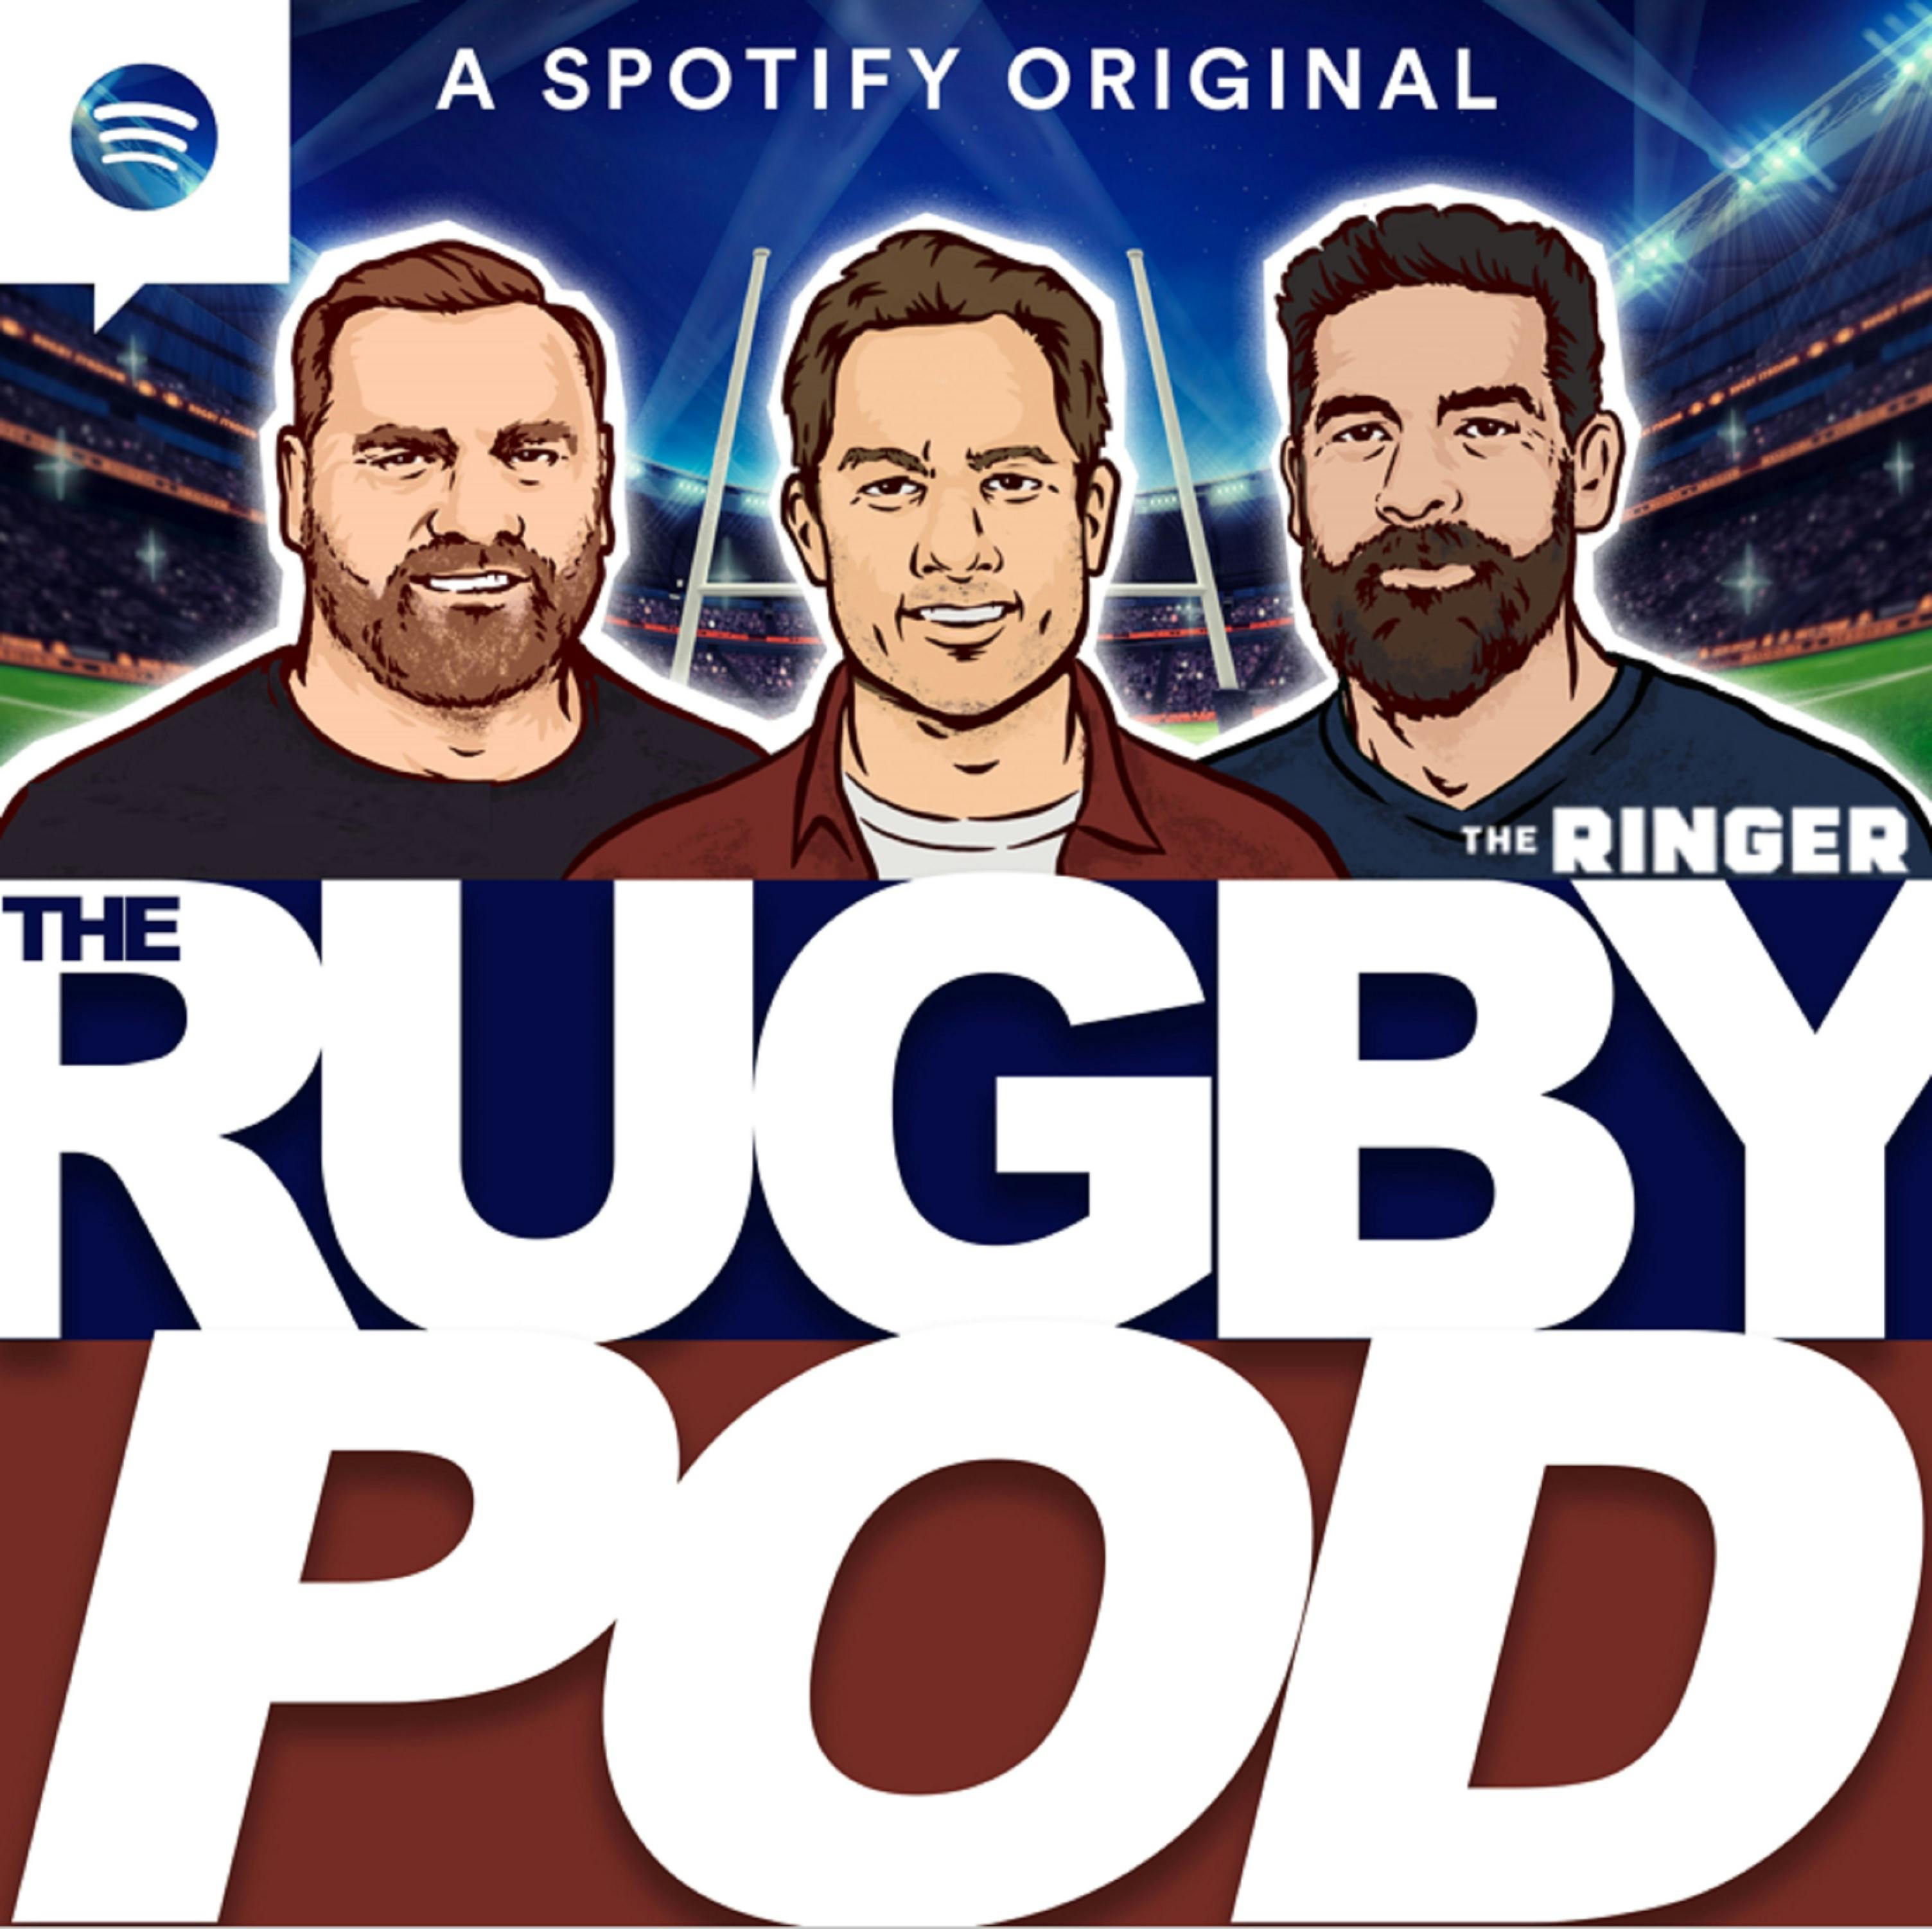 Episode 10 - Ireland's All Black Dominance and England's Plan for the Boks